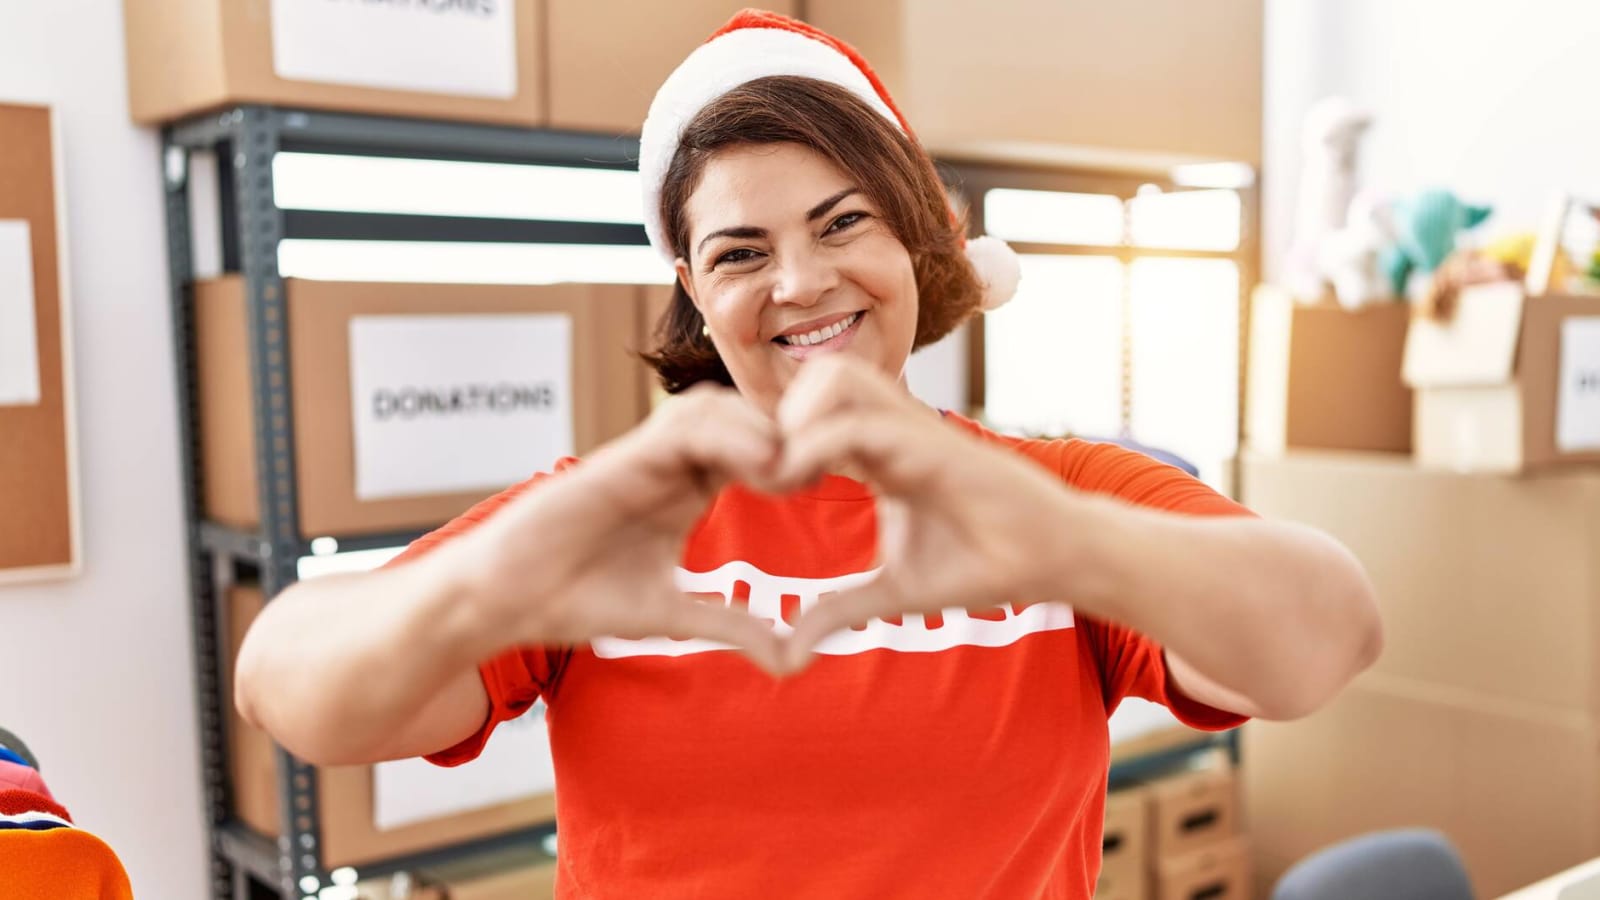 20 ways to volunteer and give back during the holiday season